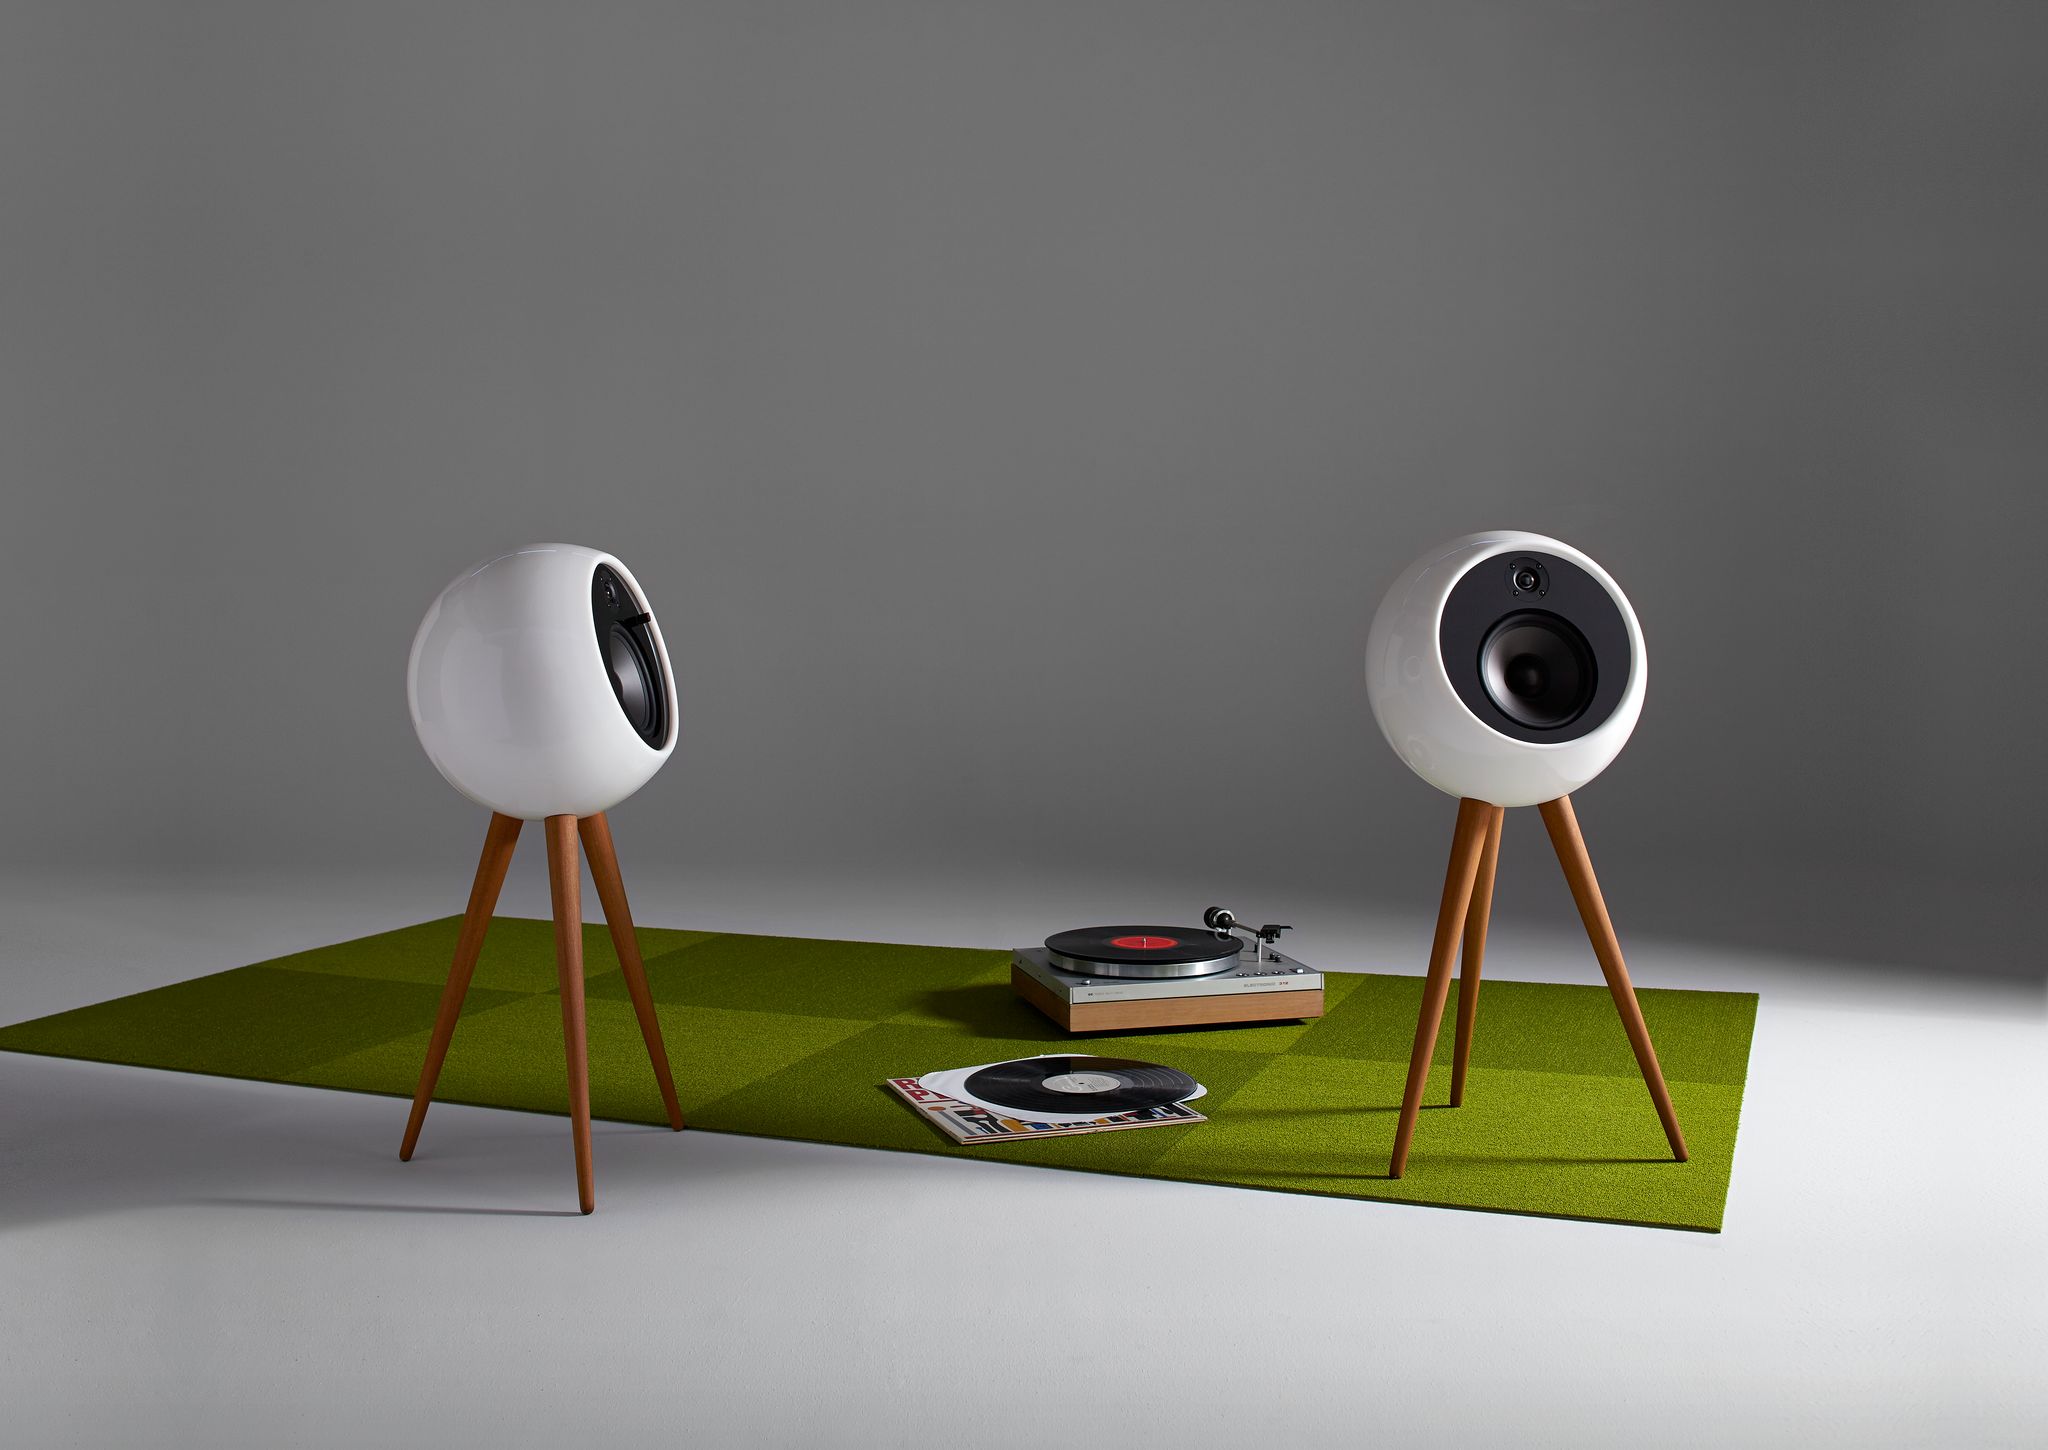 Go back to the future with this quirky Moonraker speaker system